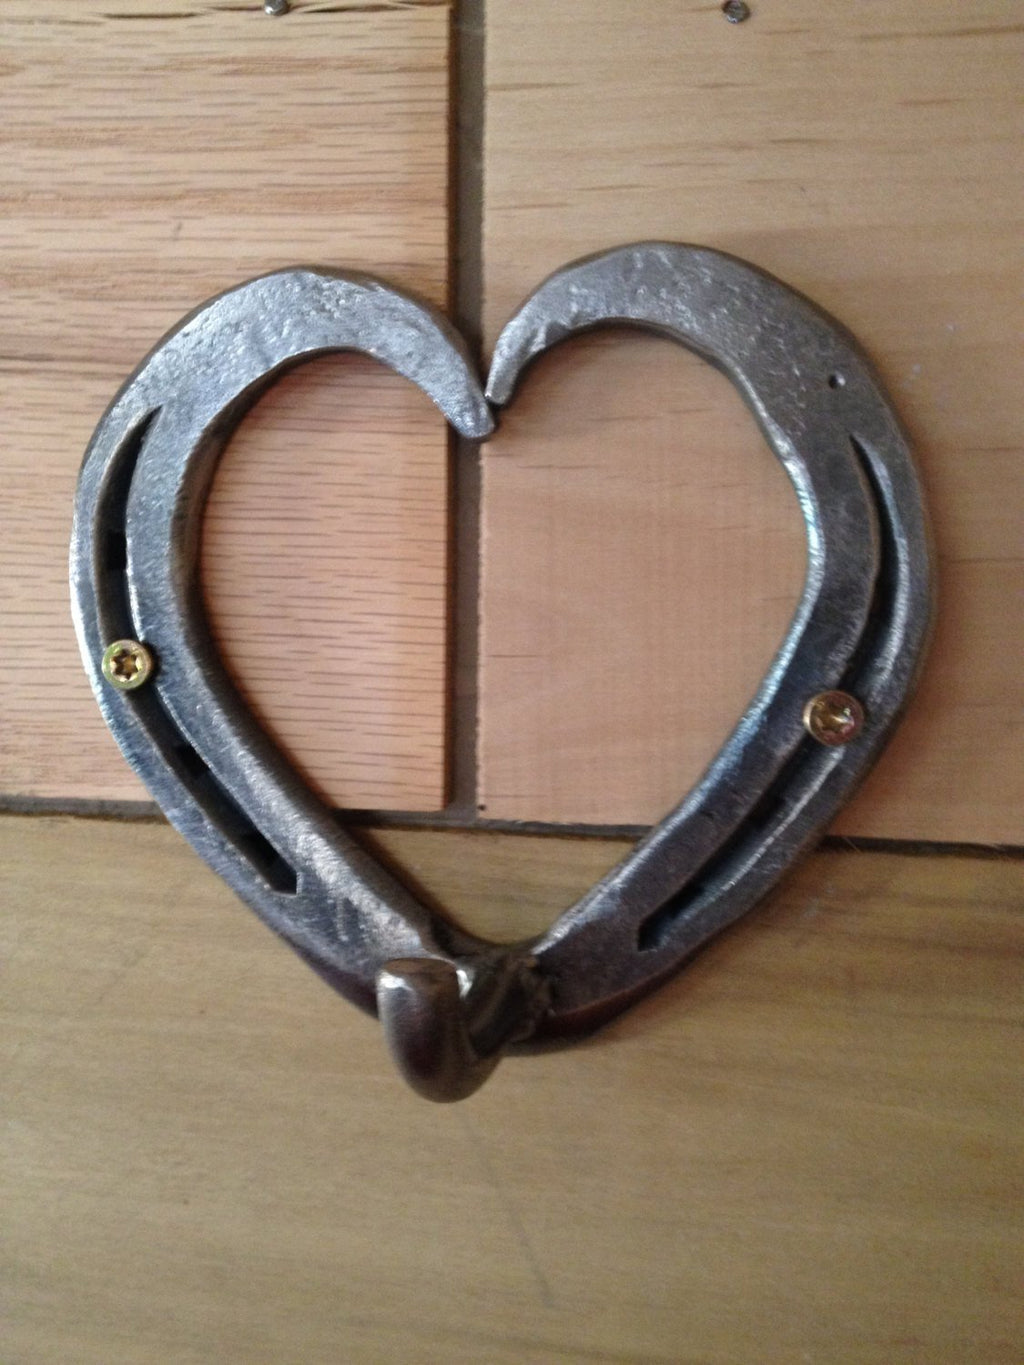 Hand-Forged Horseshoe Heart Hook Hanger - The Heritage Forge